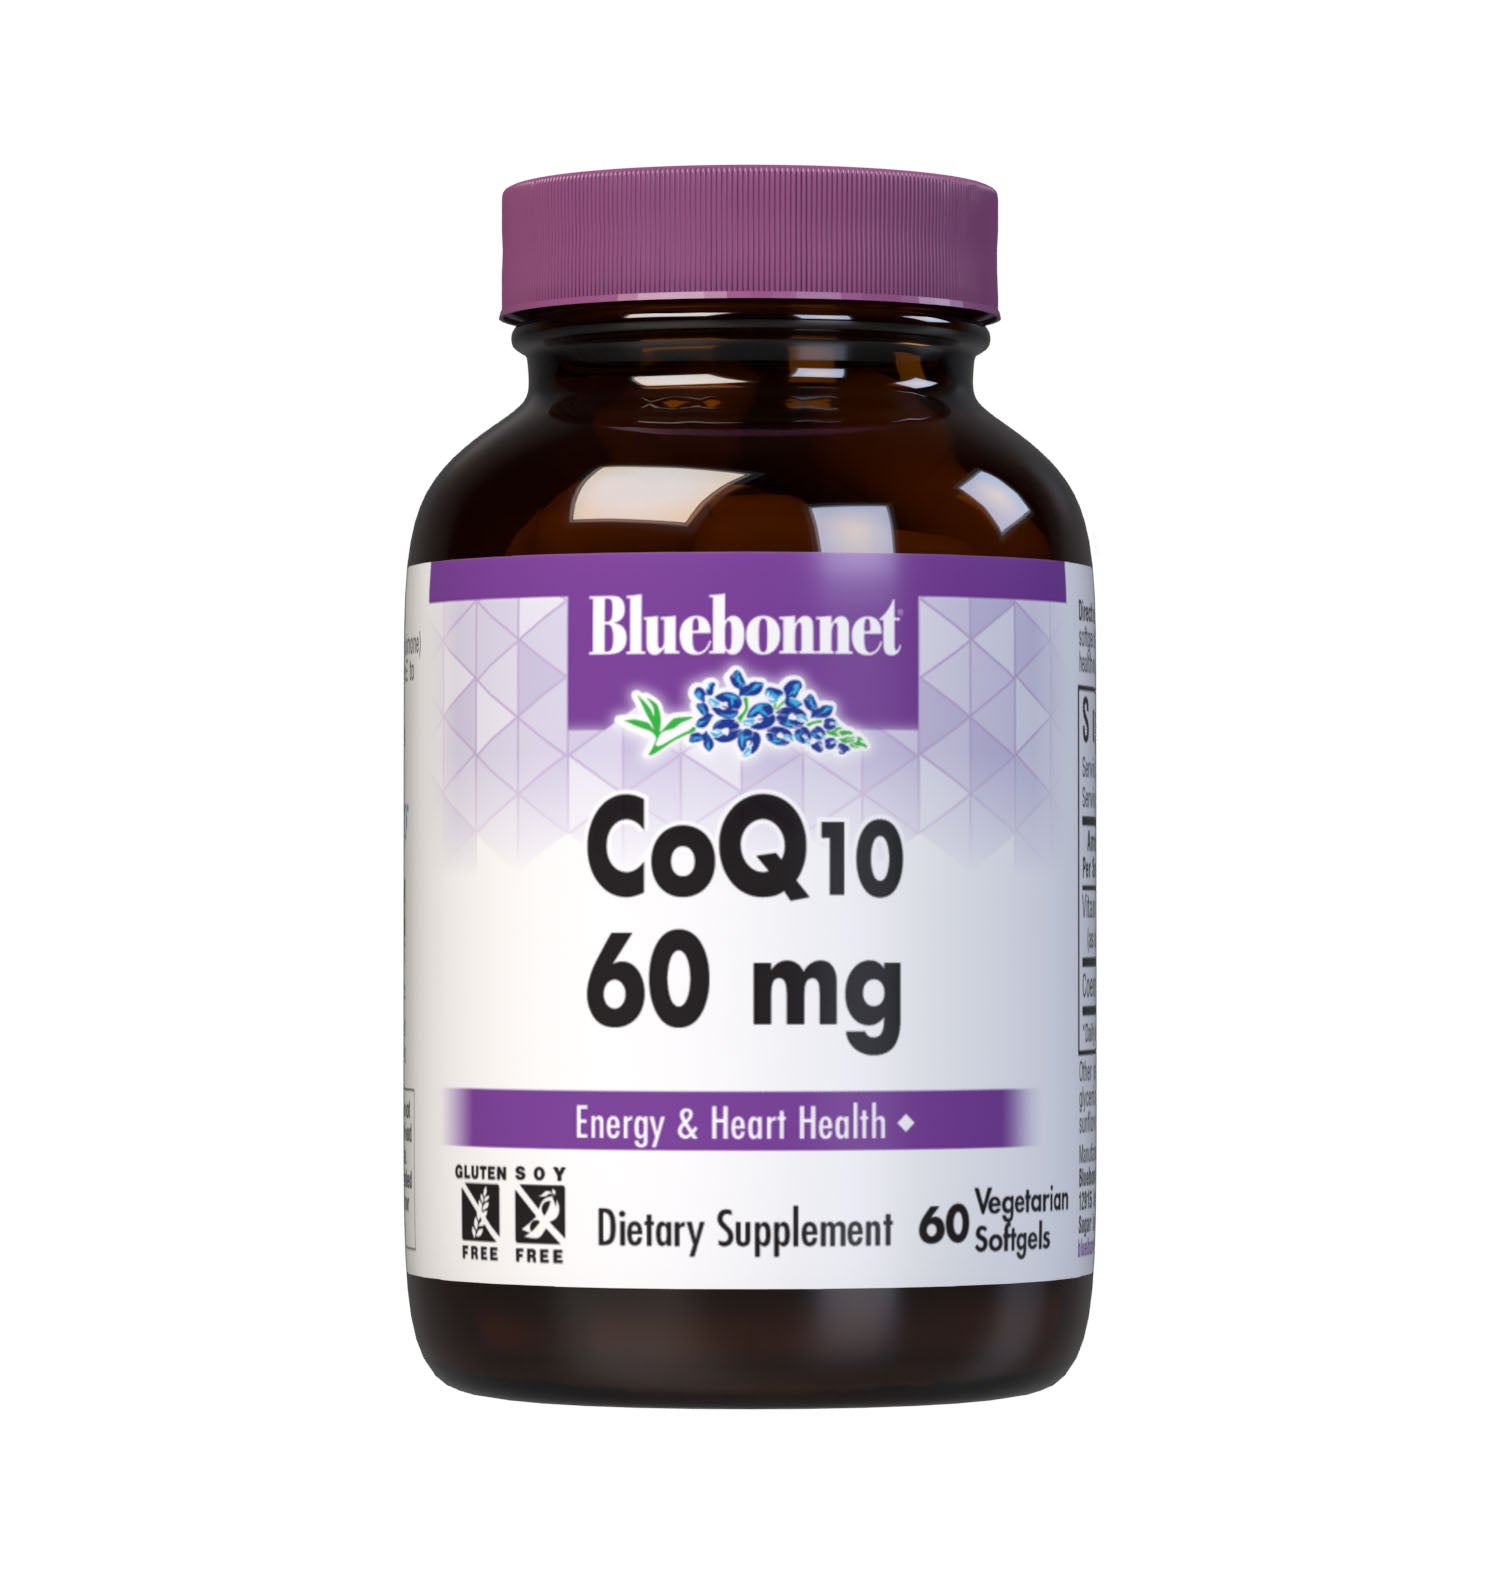 Bluebonnet’s CoQ10 60 mg 60 Vegetarian Softgels are formulated with the “trans-isomer” form of ubiquinone from Kaneka, the world’s largest manufacturer of premium-quality Coenzyme Q-10, in a base of non-GMO sunflower oil plus vitamin E to enhance stability. CoQ10 promotes antioxidant protection and cardiovascular health. #size_60 count